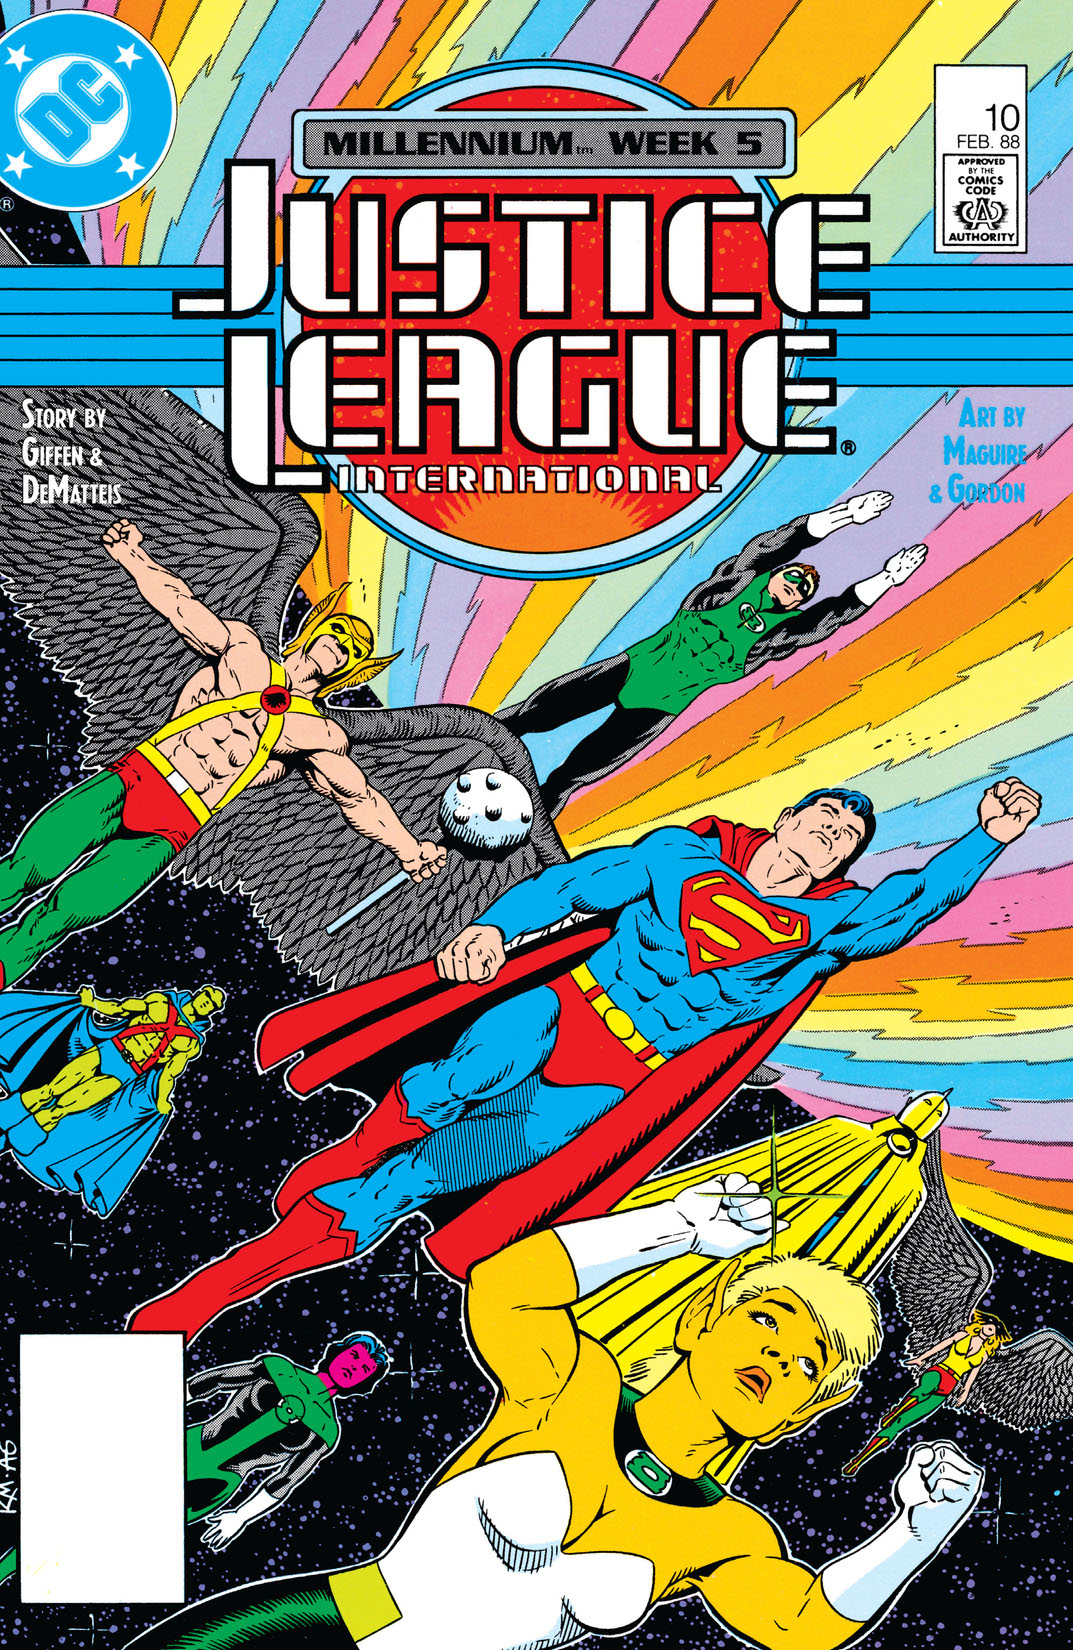 Justice League International (1987-) #10 preview images